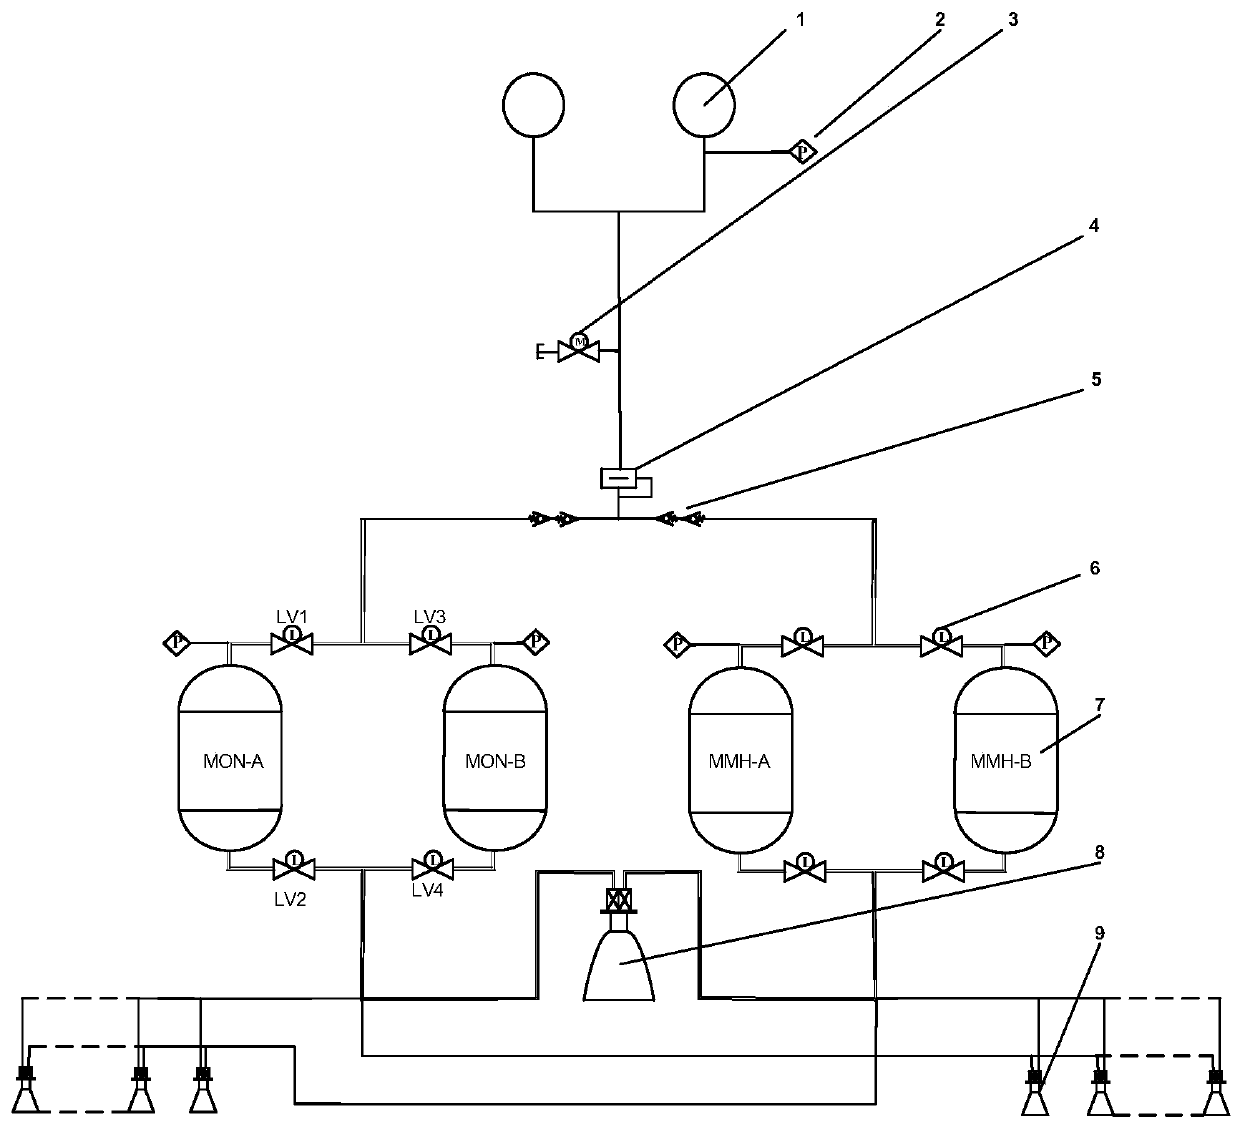 A method for regulating and balancing emissions based on a gas bypass-free propulsion system